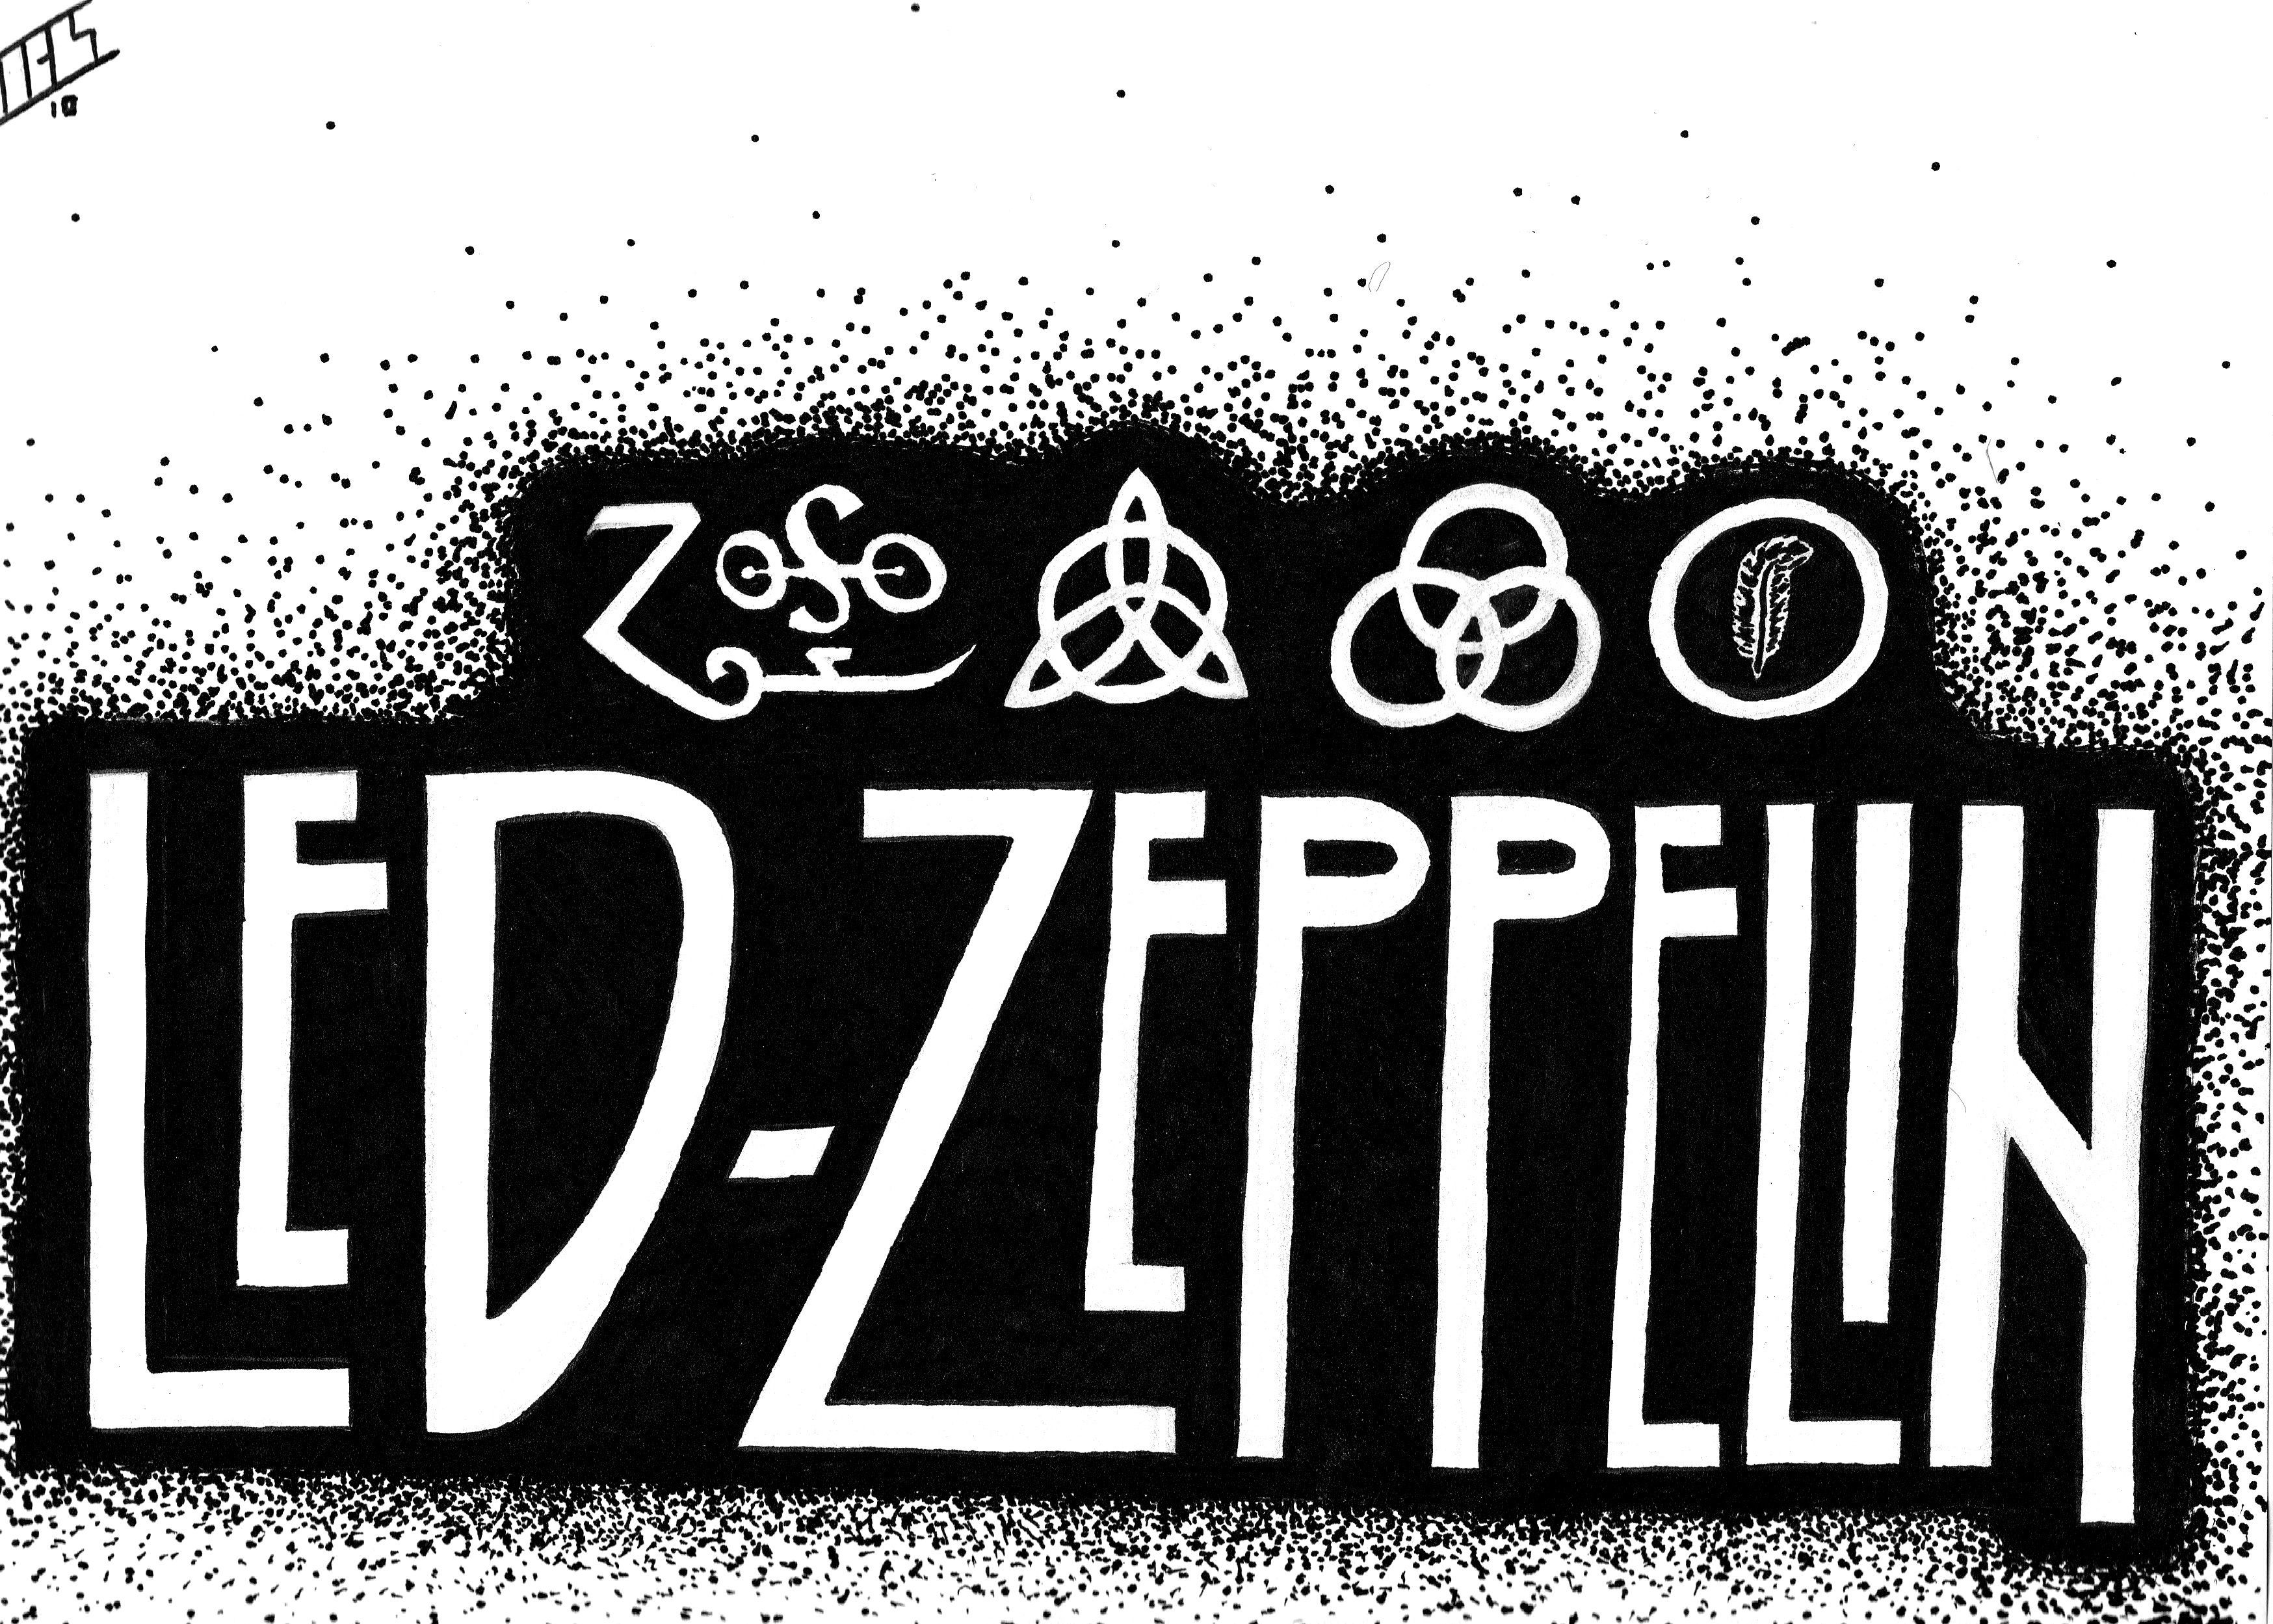 Led Zeppelin hard rock classic groups bands jimmy page robert